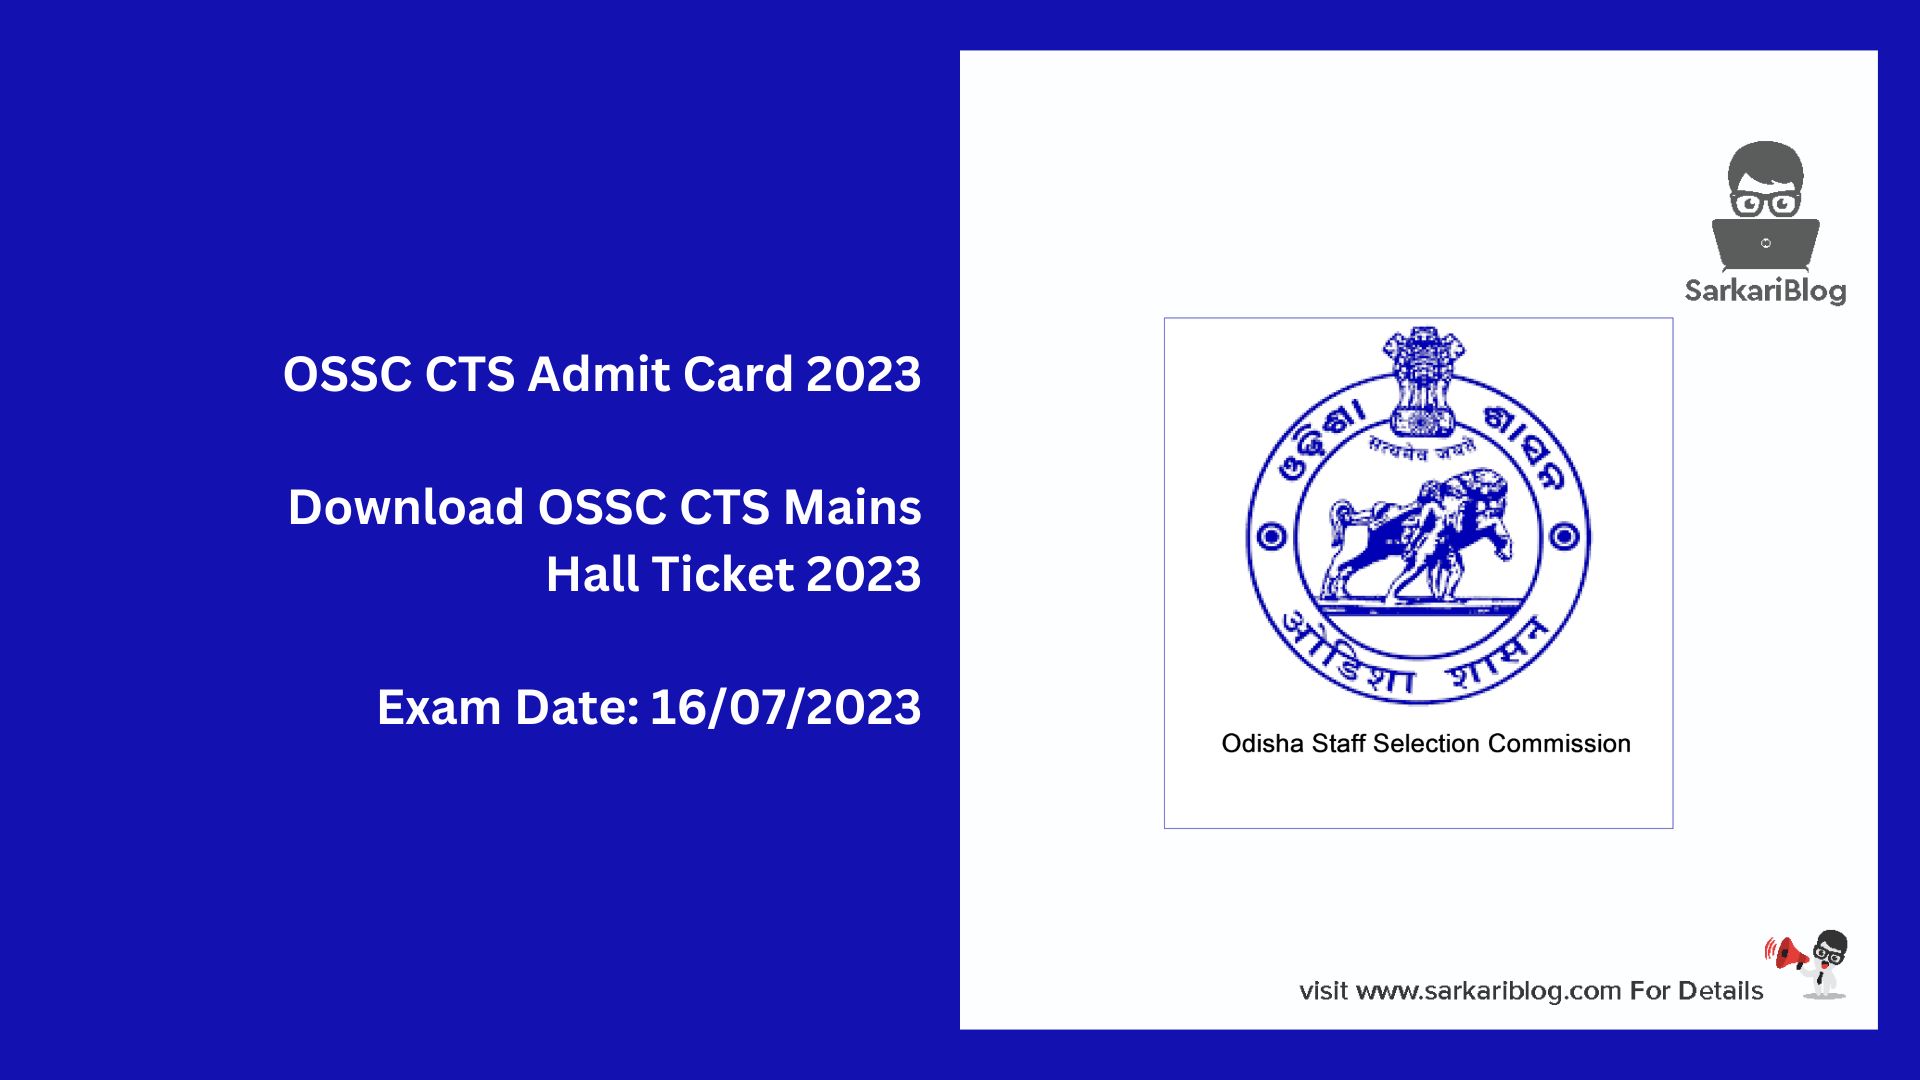 OSSC CTS Admit Card 2023